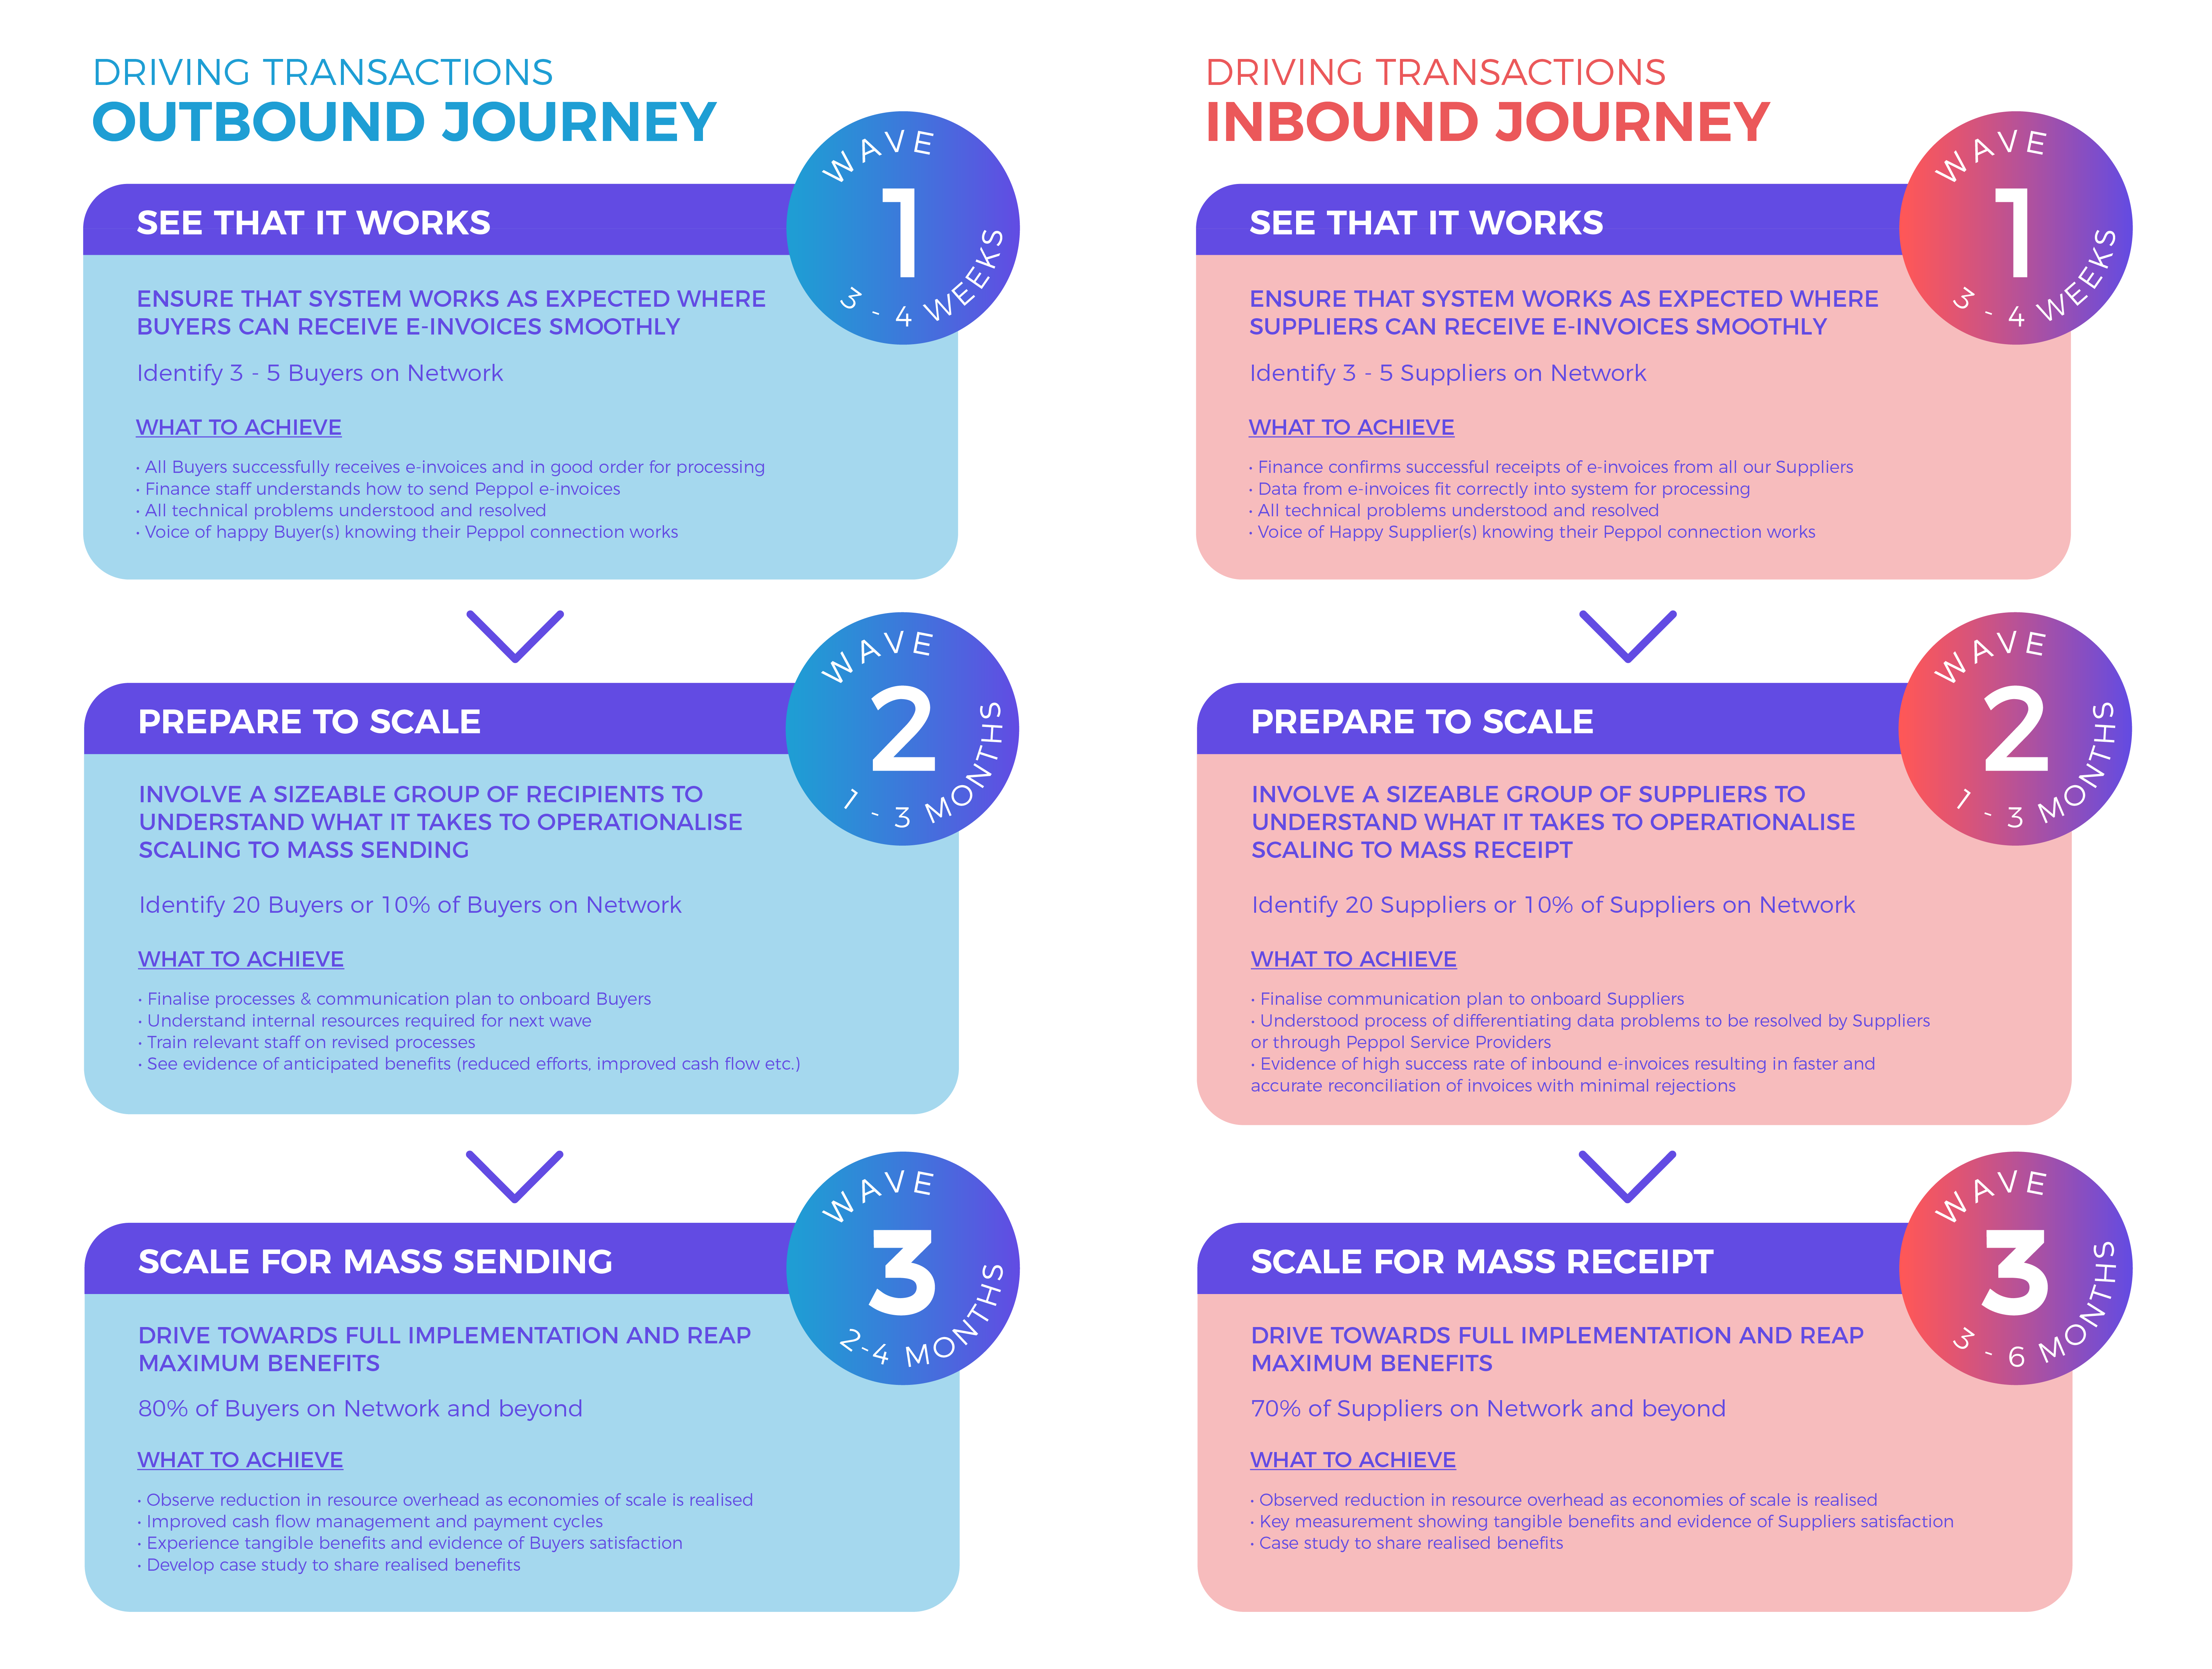 Infographic by IMDA on transacting with partners for outbound and inbound journeys